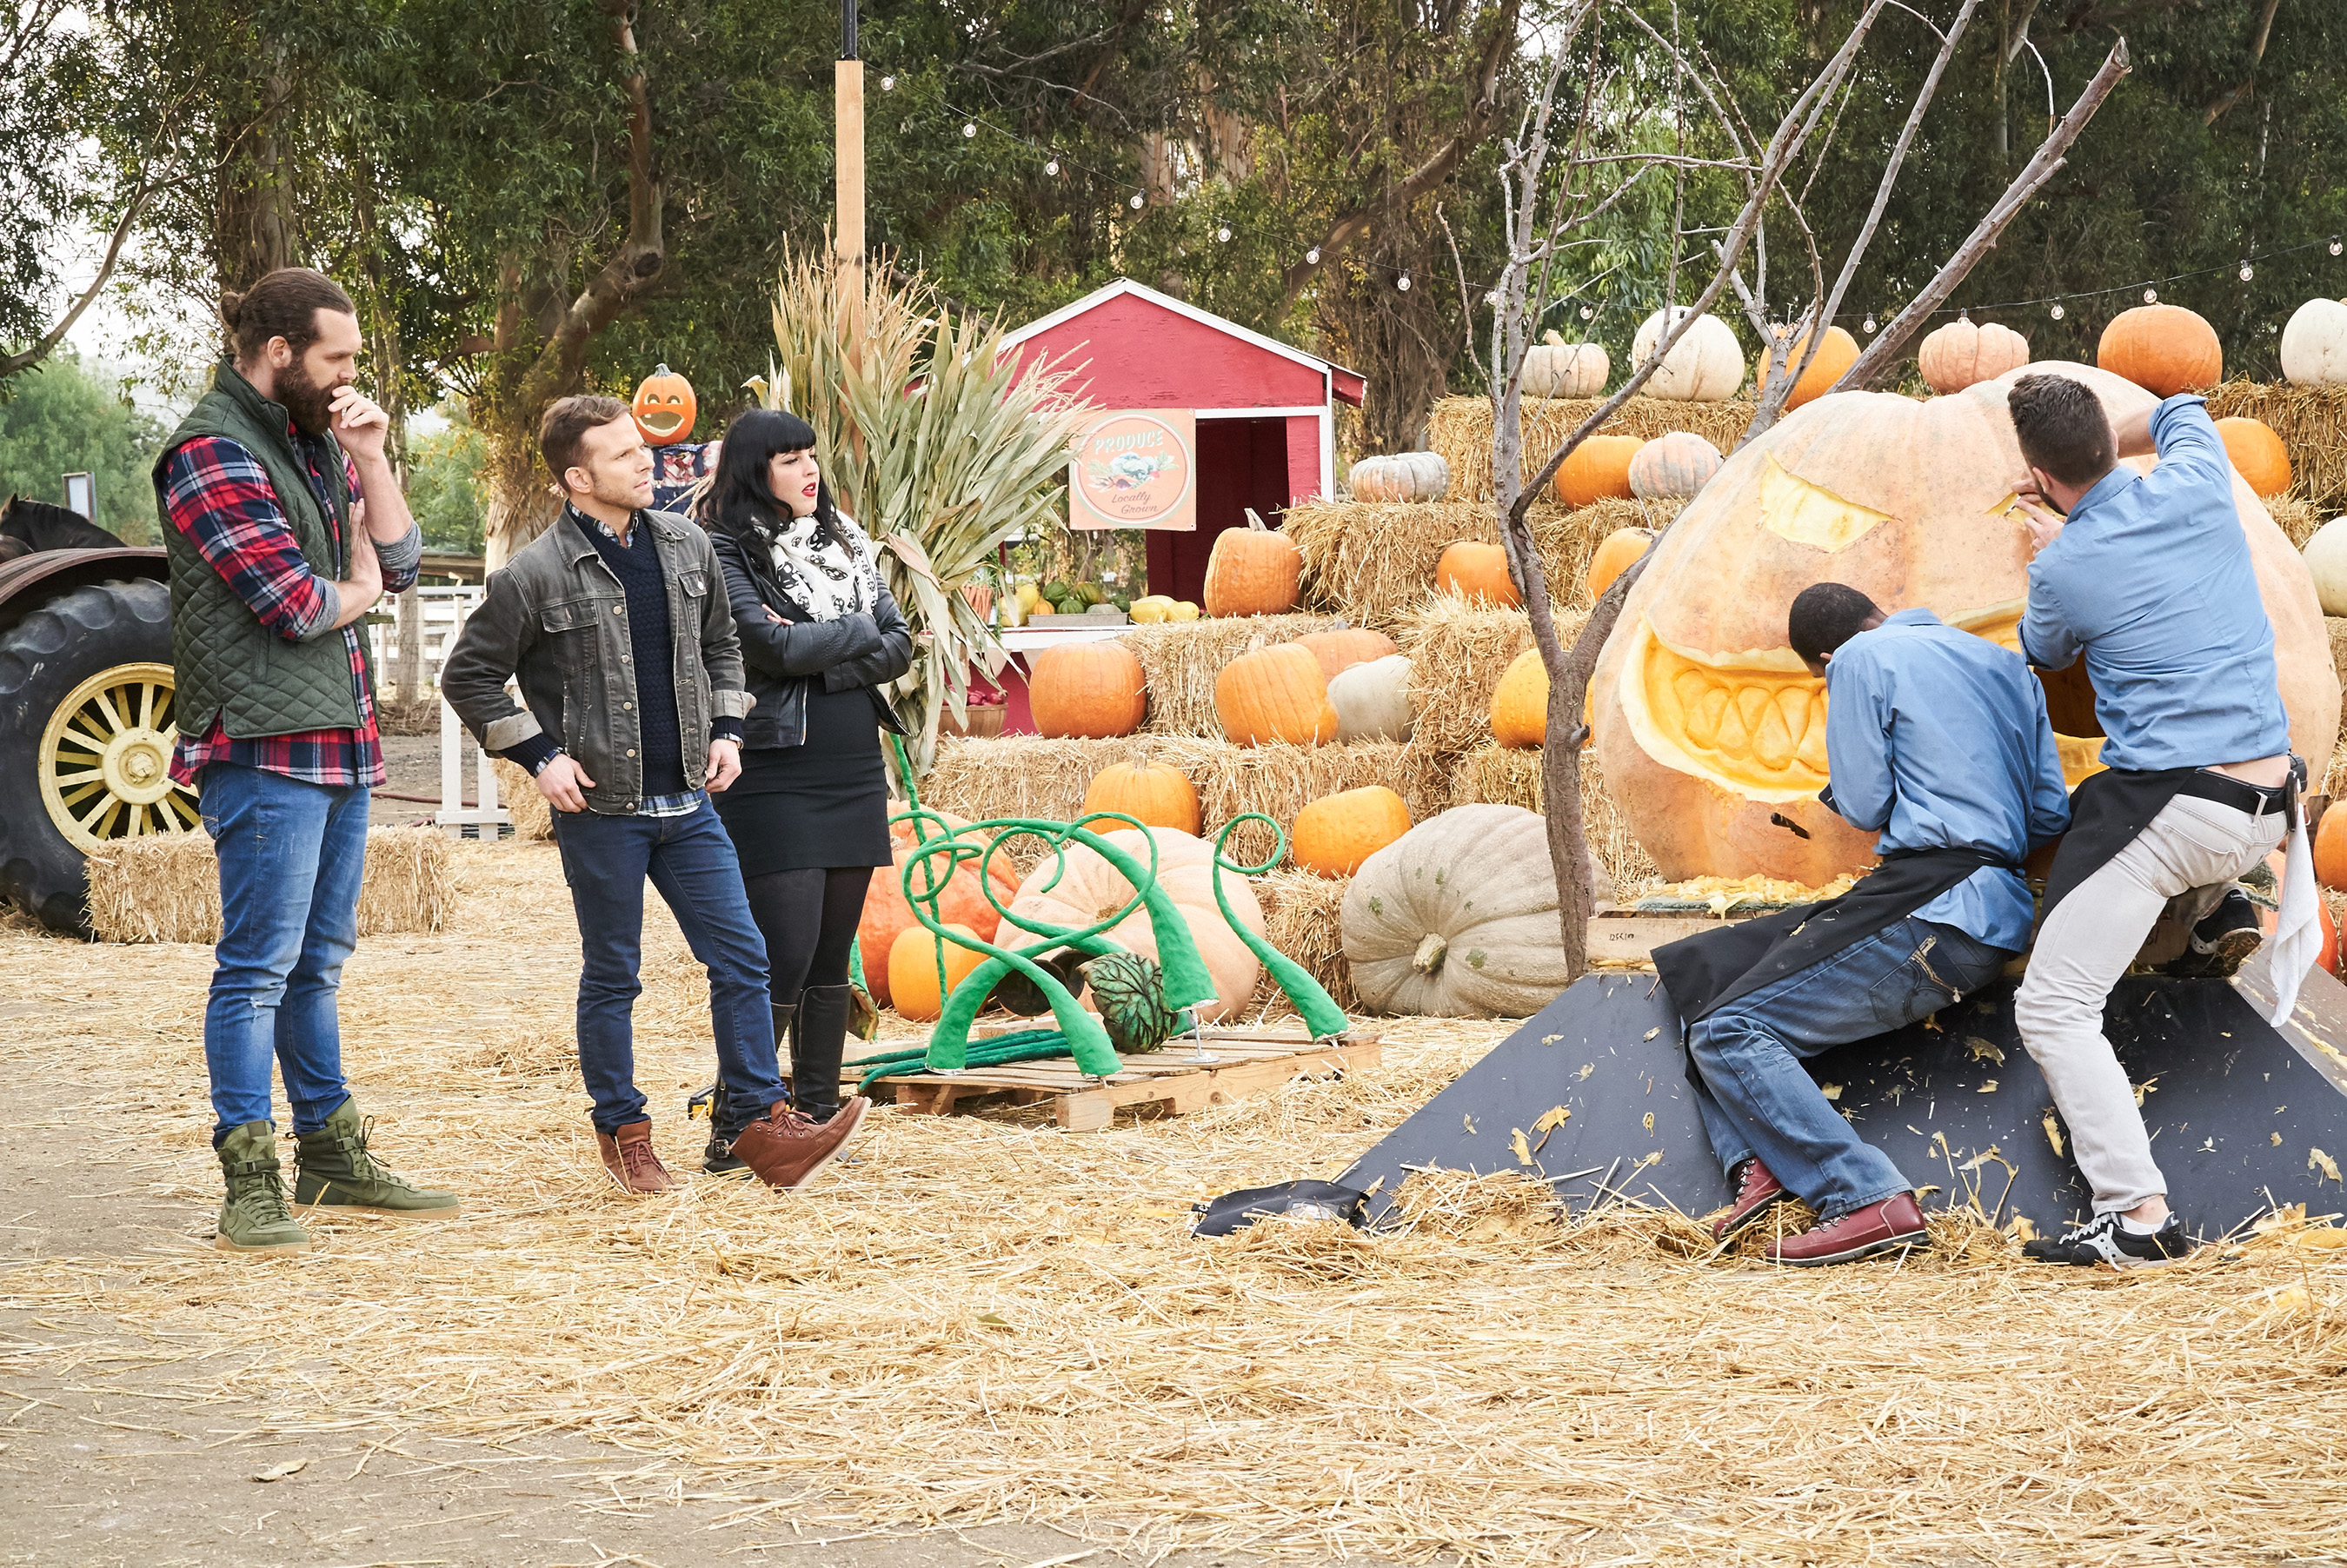 Host Harley Morenstein and judges Zac Young and Bianca Appice watching competitors on Food Network’s Halloween Wars: Hayride of Horror